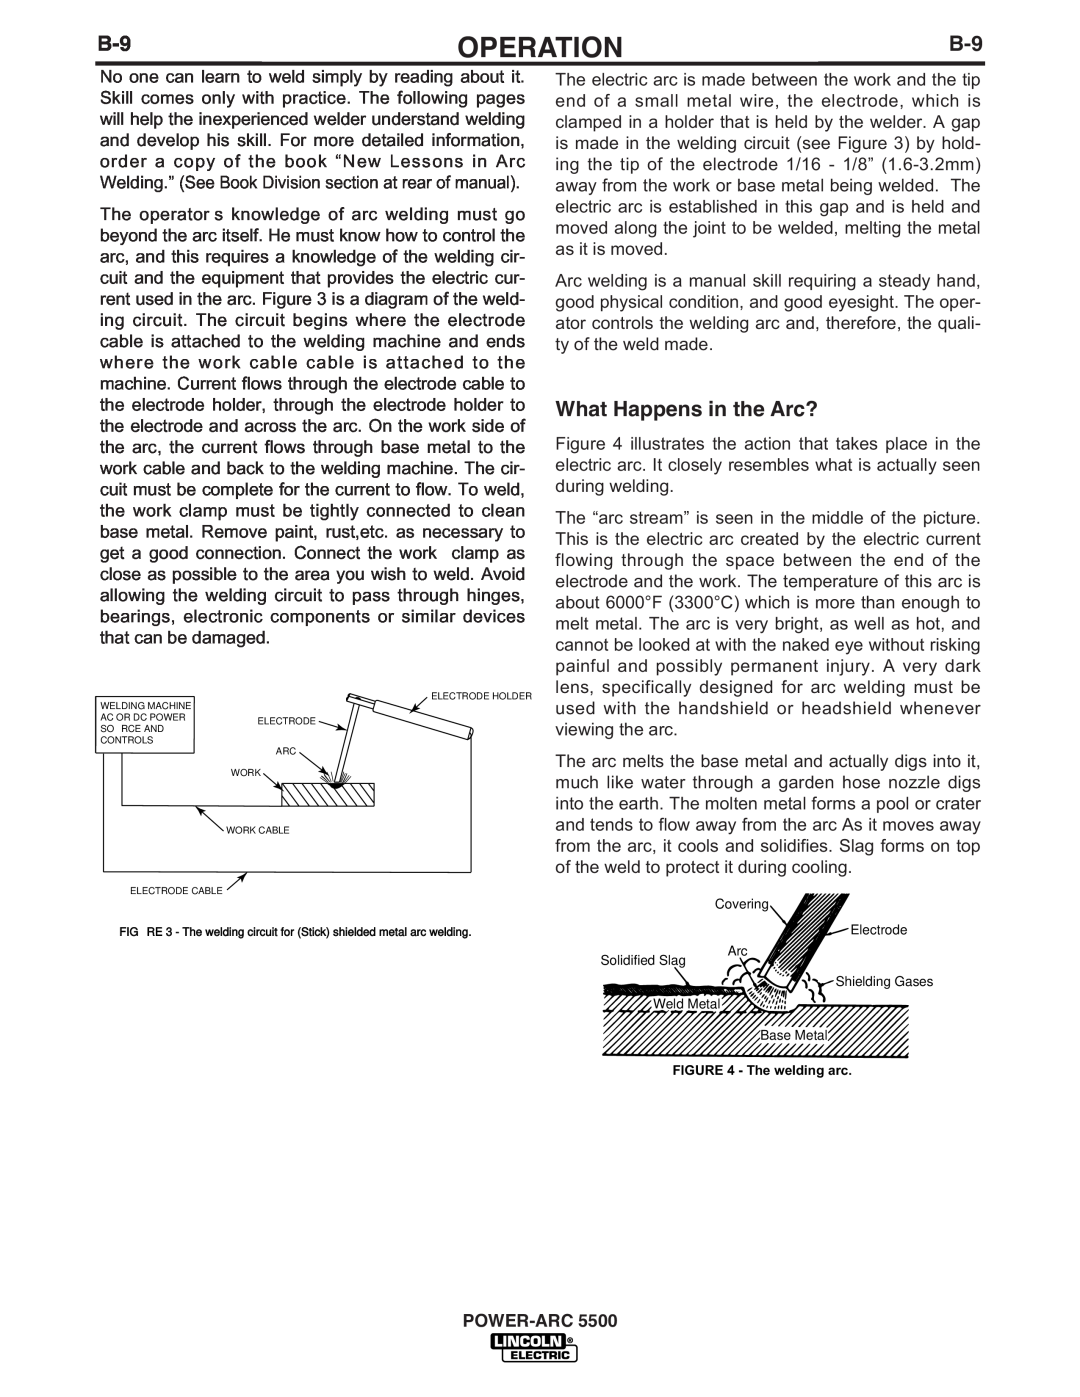 Lincoln Electric IM871-A manual What Happens in the Arc?, Operation, POWER-ARC5500, The welding arc 